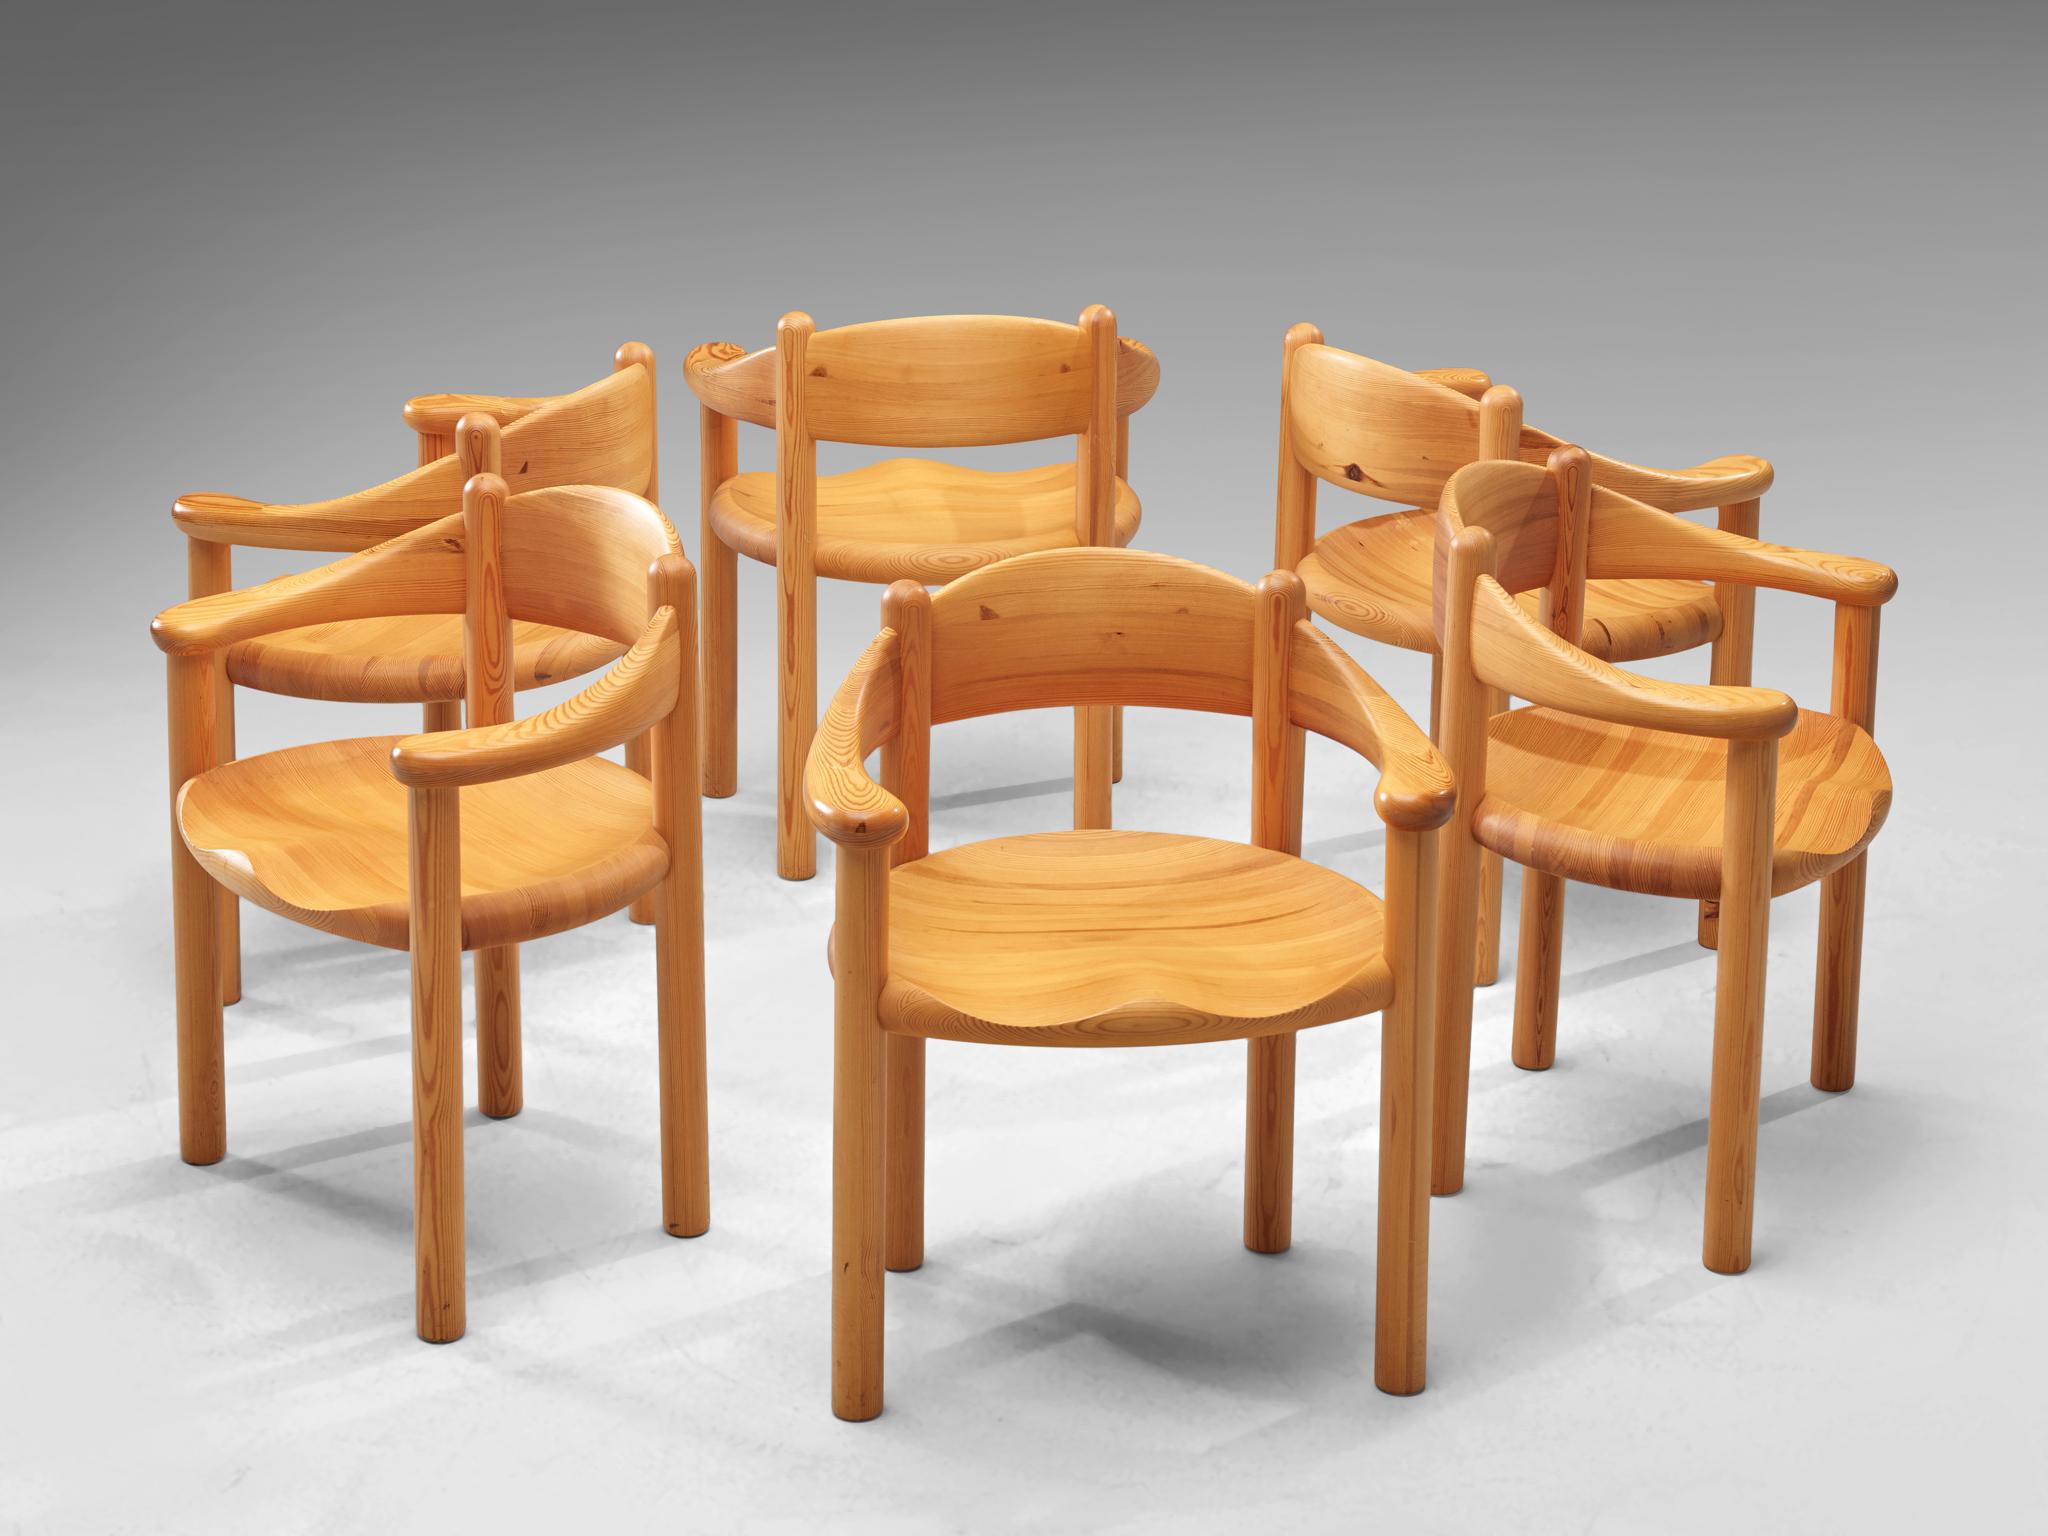 Rainer Daumiller for Hirtshals Savvaerk, set of six armchairs, pine, Denmark, 1970s.

Beautiful set of six organic and natural armchairs in solid pine. A simplistic design with a round seating and full attention for the natural expression and grain